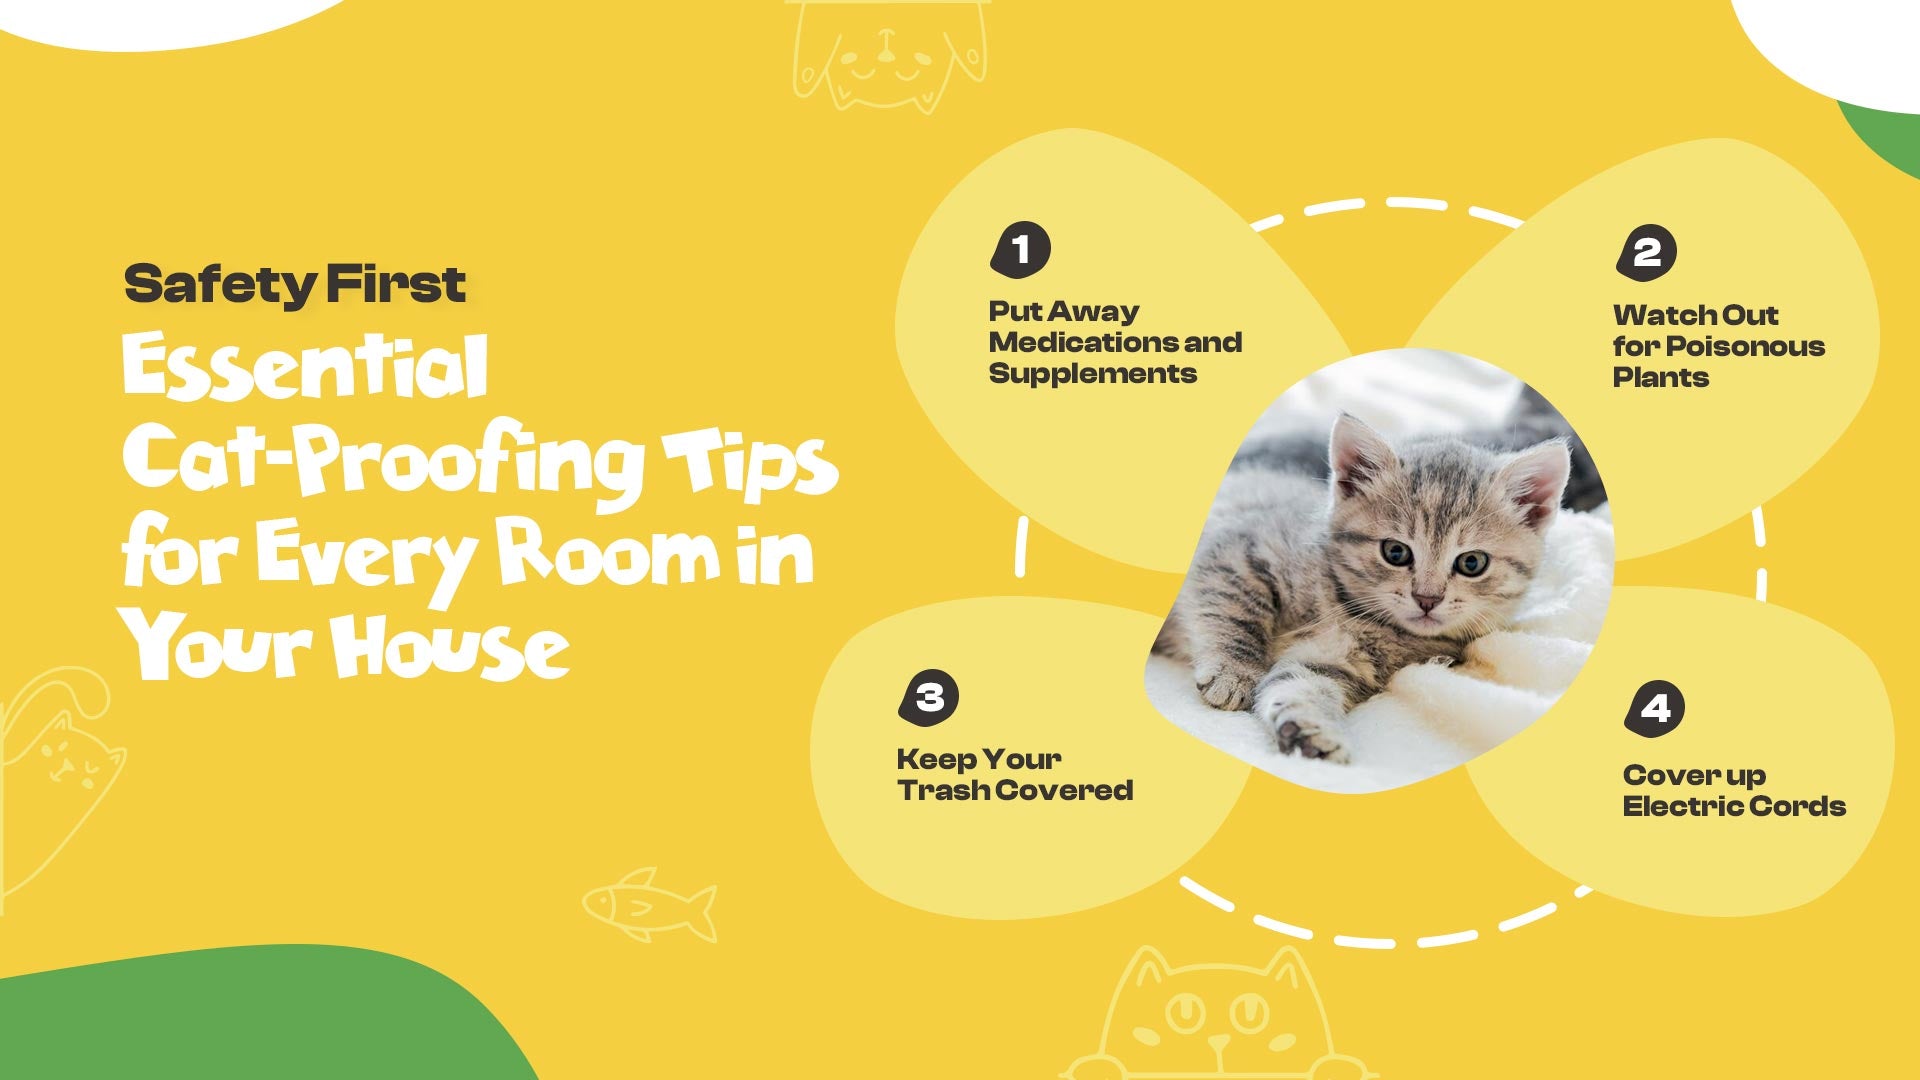 Safety First: Essential Cat-Proofing Tips for Every Room in Your House